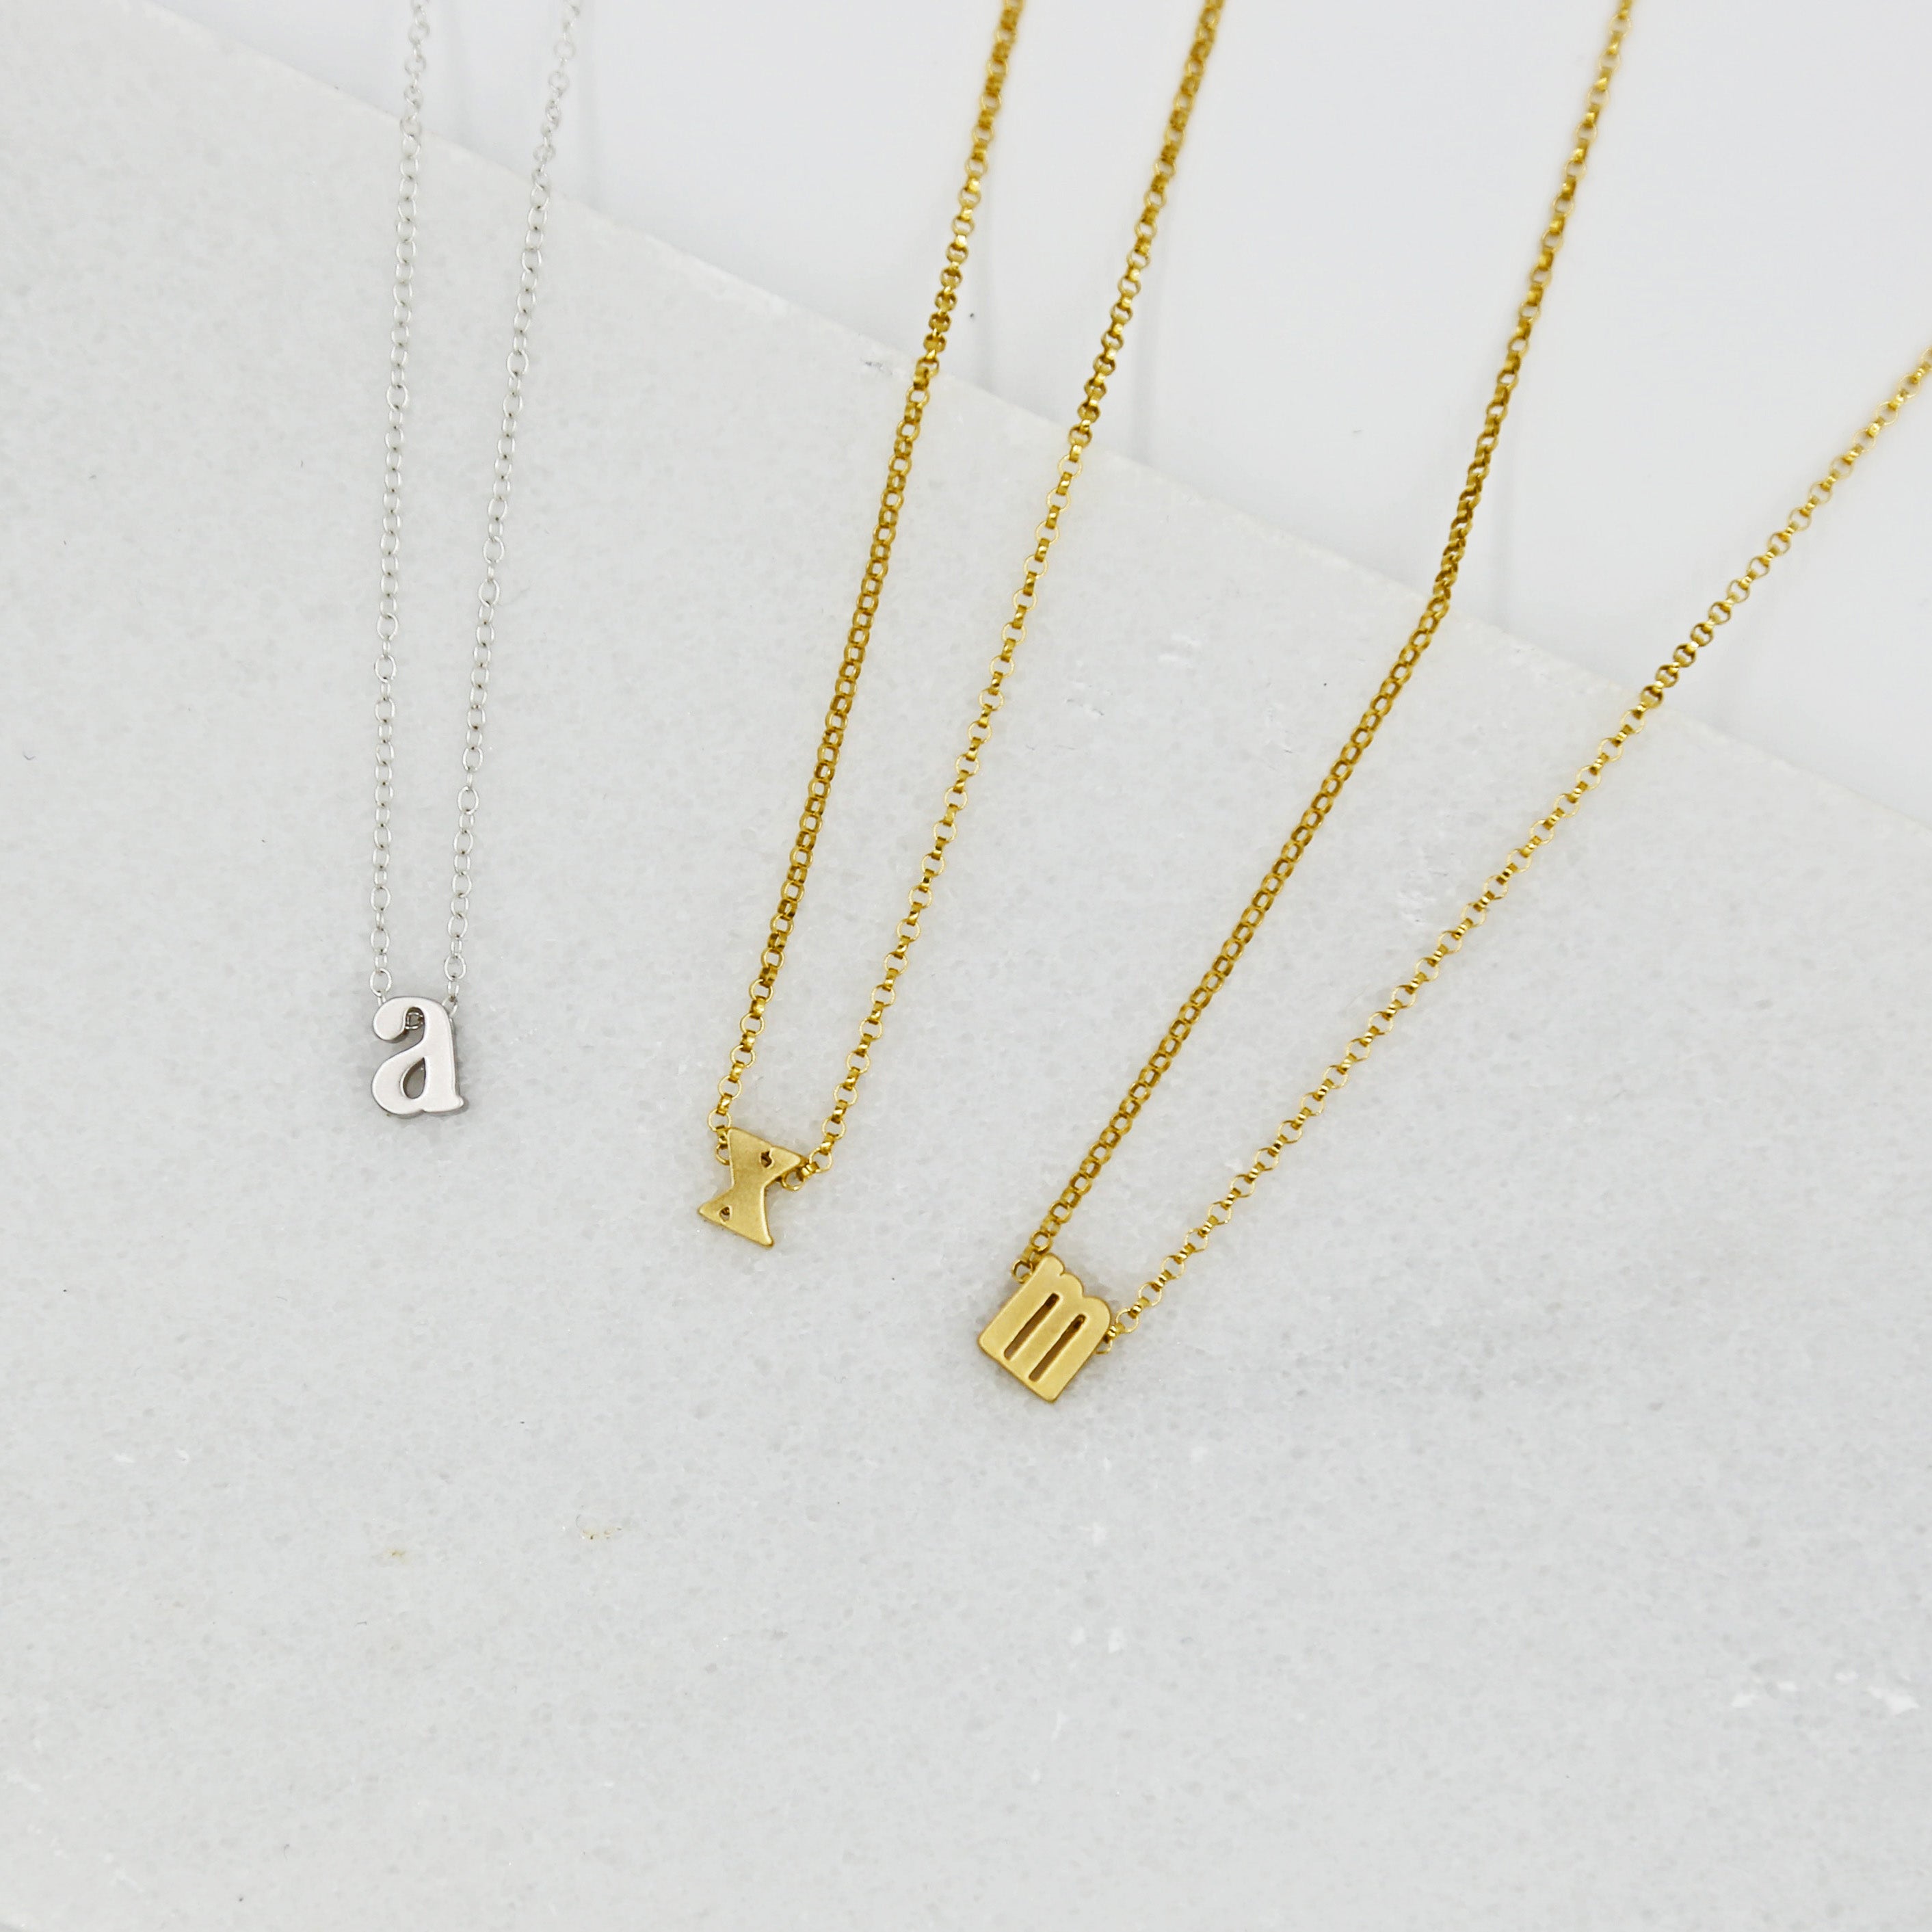 Buy Gold Heart Initial Necklace p Gold Initial Heart Letter Necklace Pendant  18K Gold Plated Including Free Gift Box & Bag Online in India - Etsy